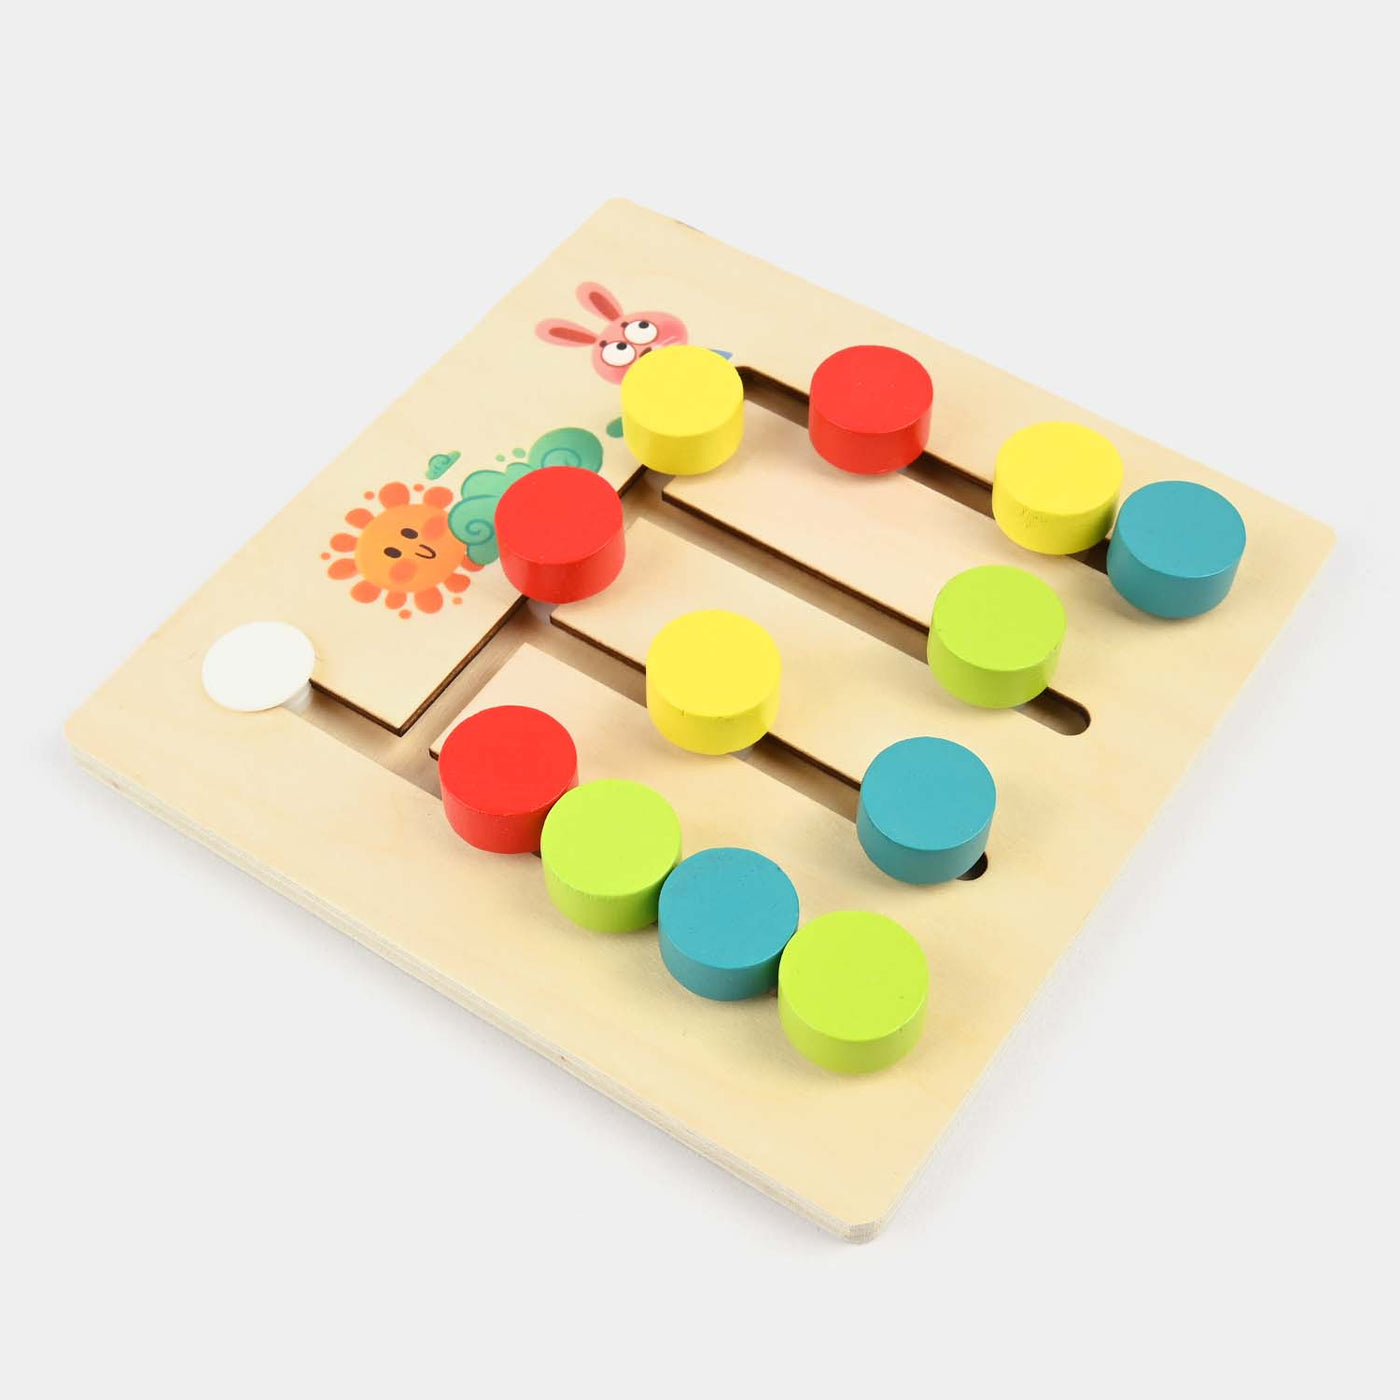 Mobile 4 Color Wooden Game For Kids